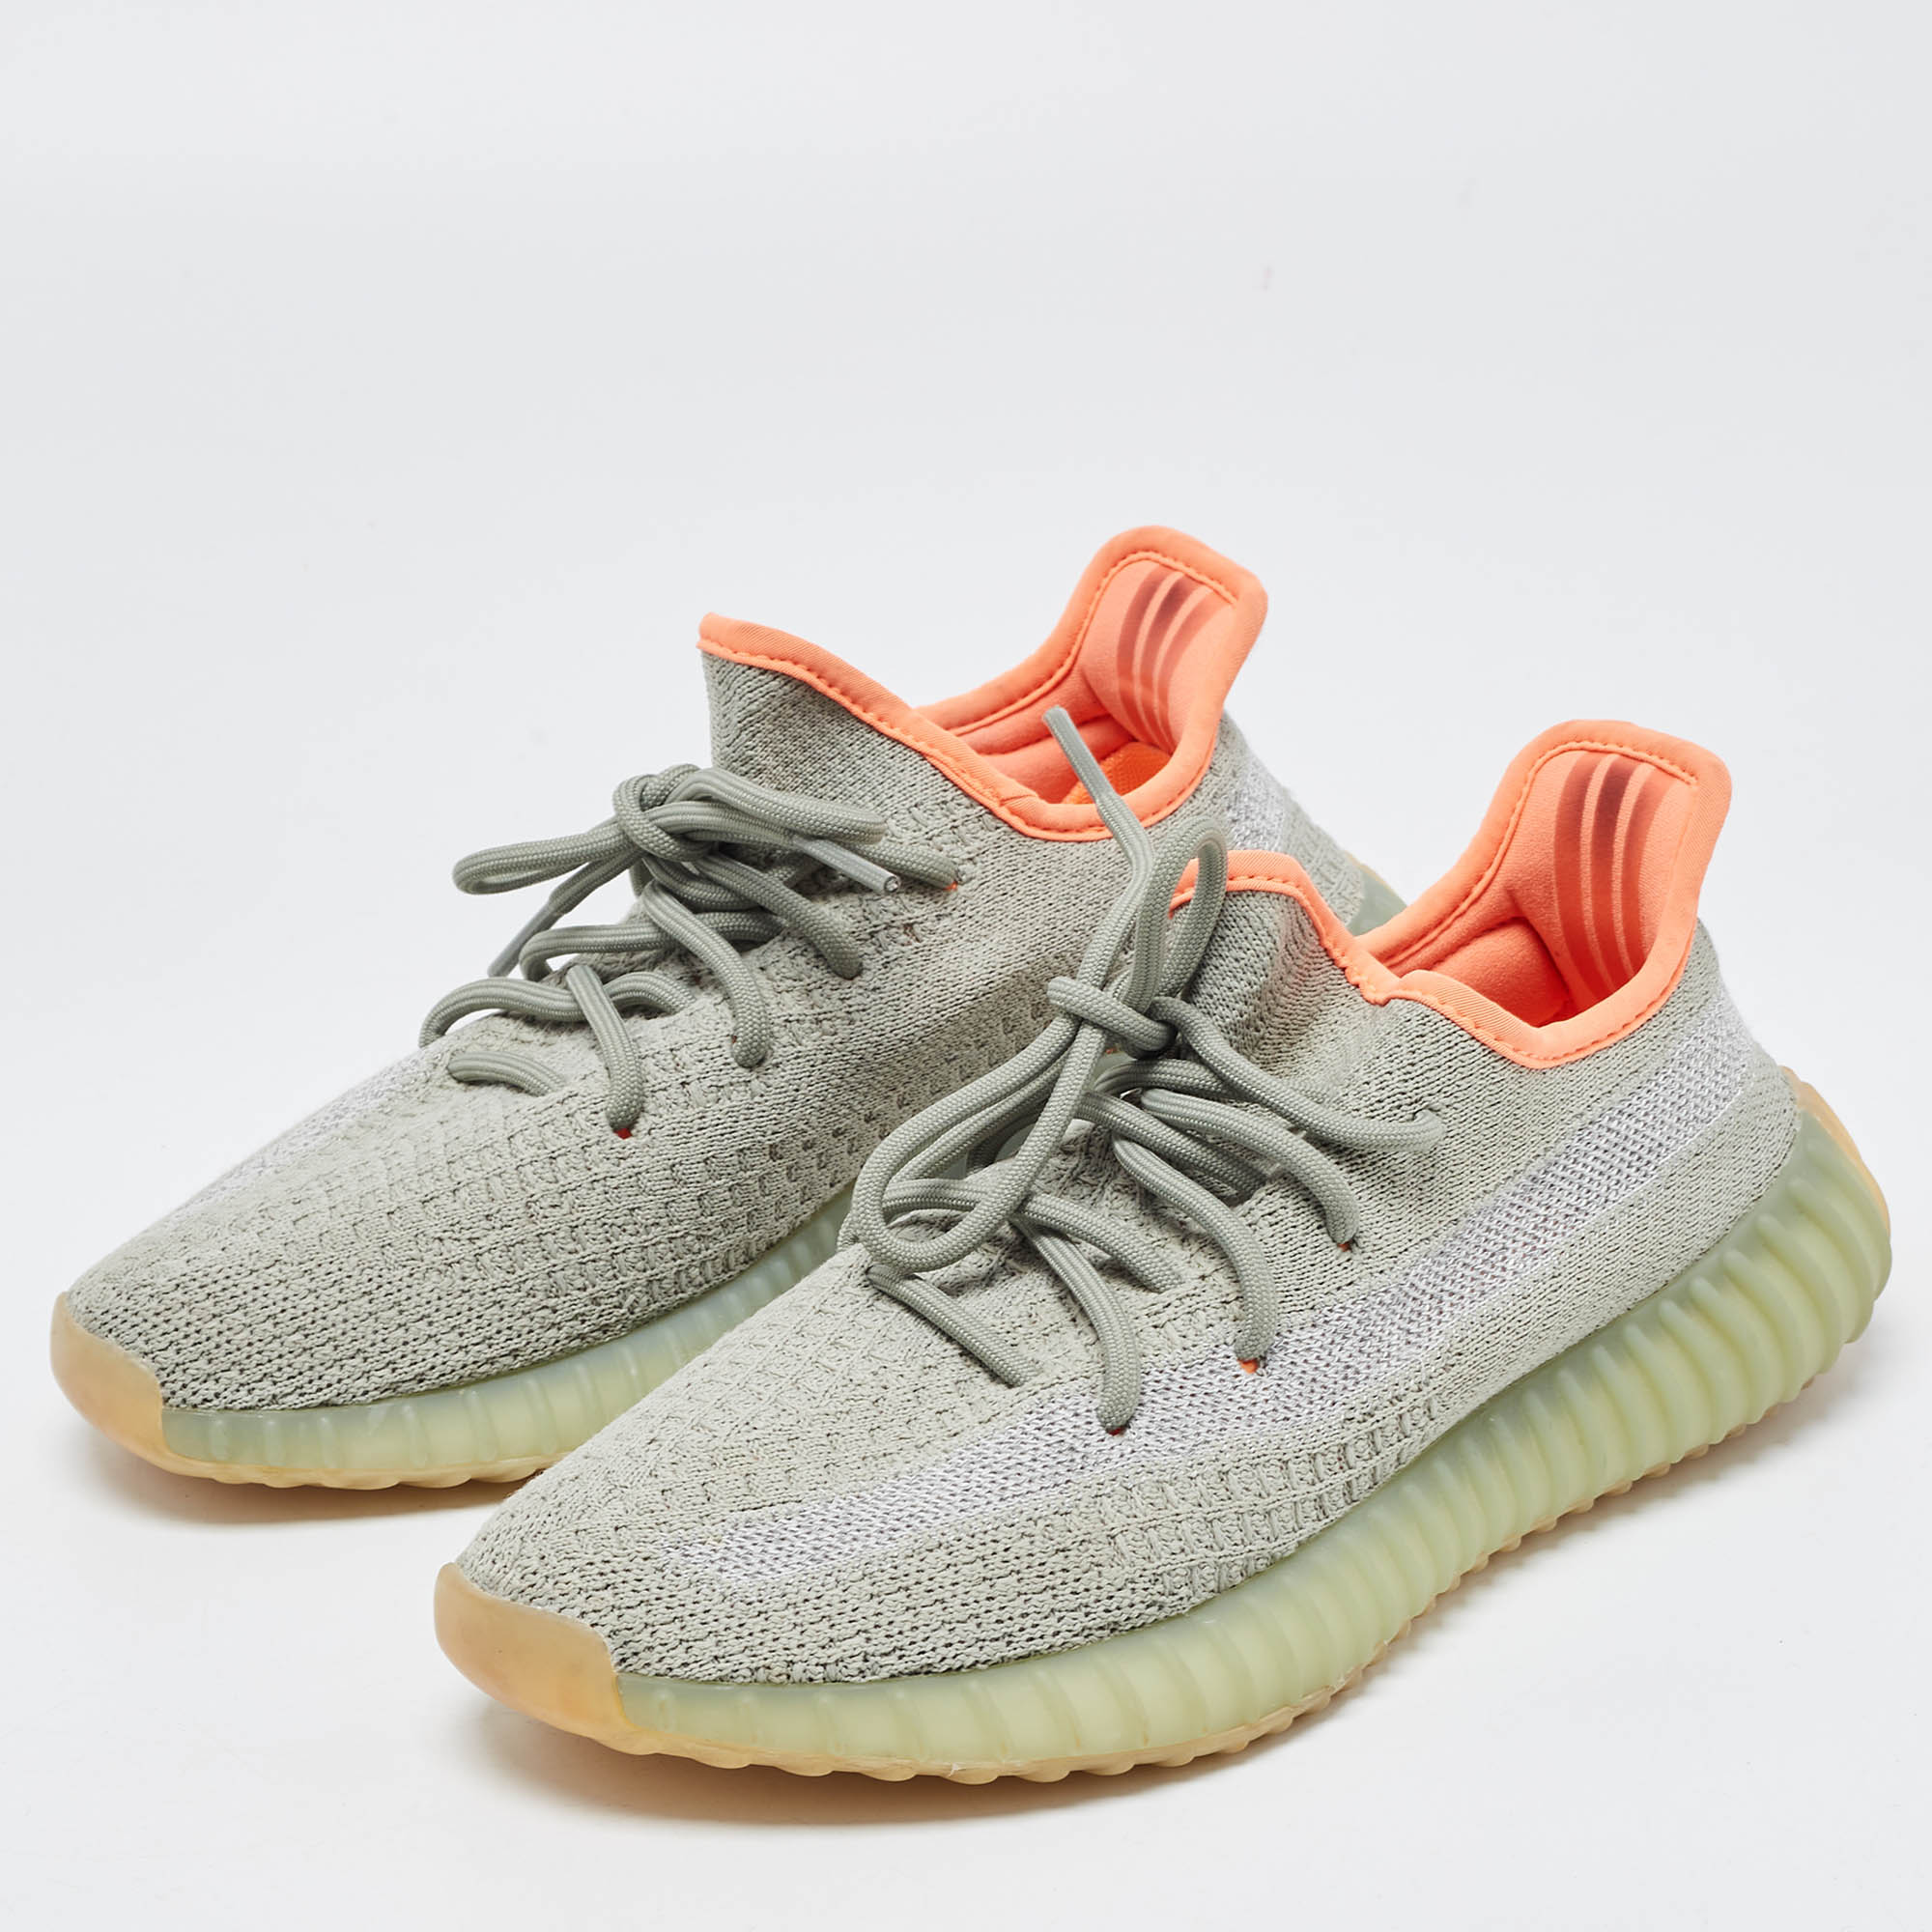 

Yeezy x Adidas Green Knit Fabric Boost 350 V2 Desert Sage Sneakers Size 38 2/3